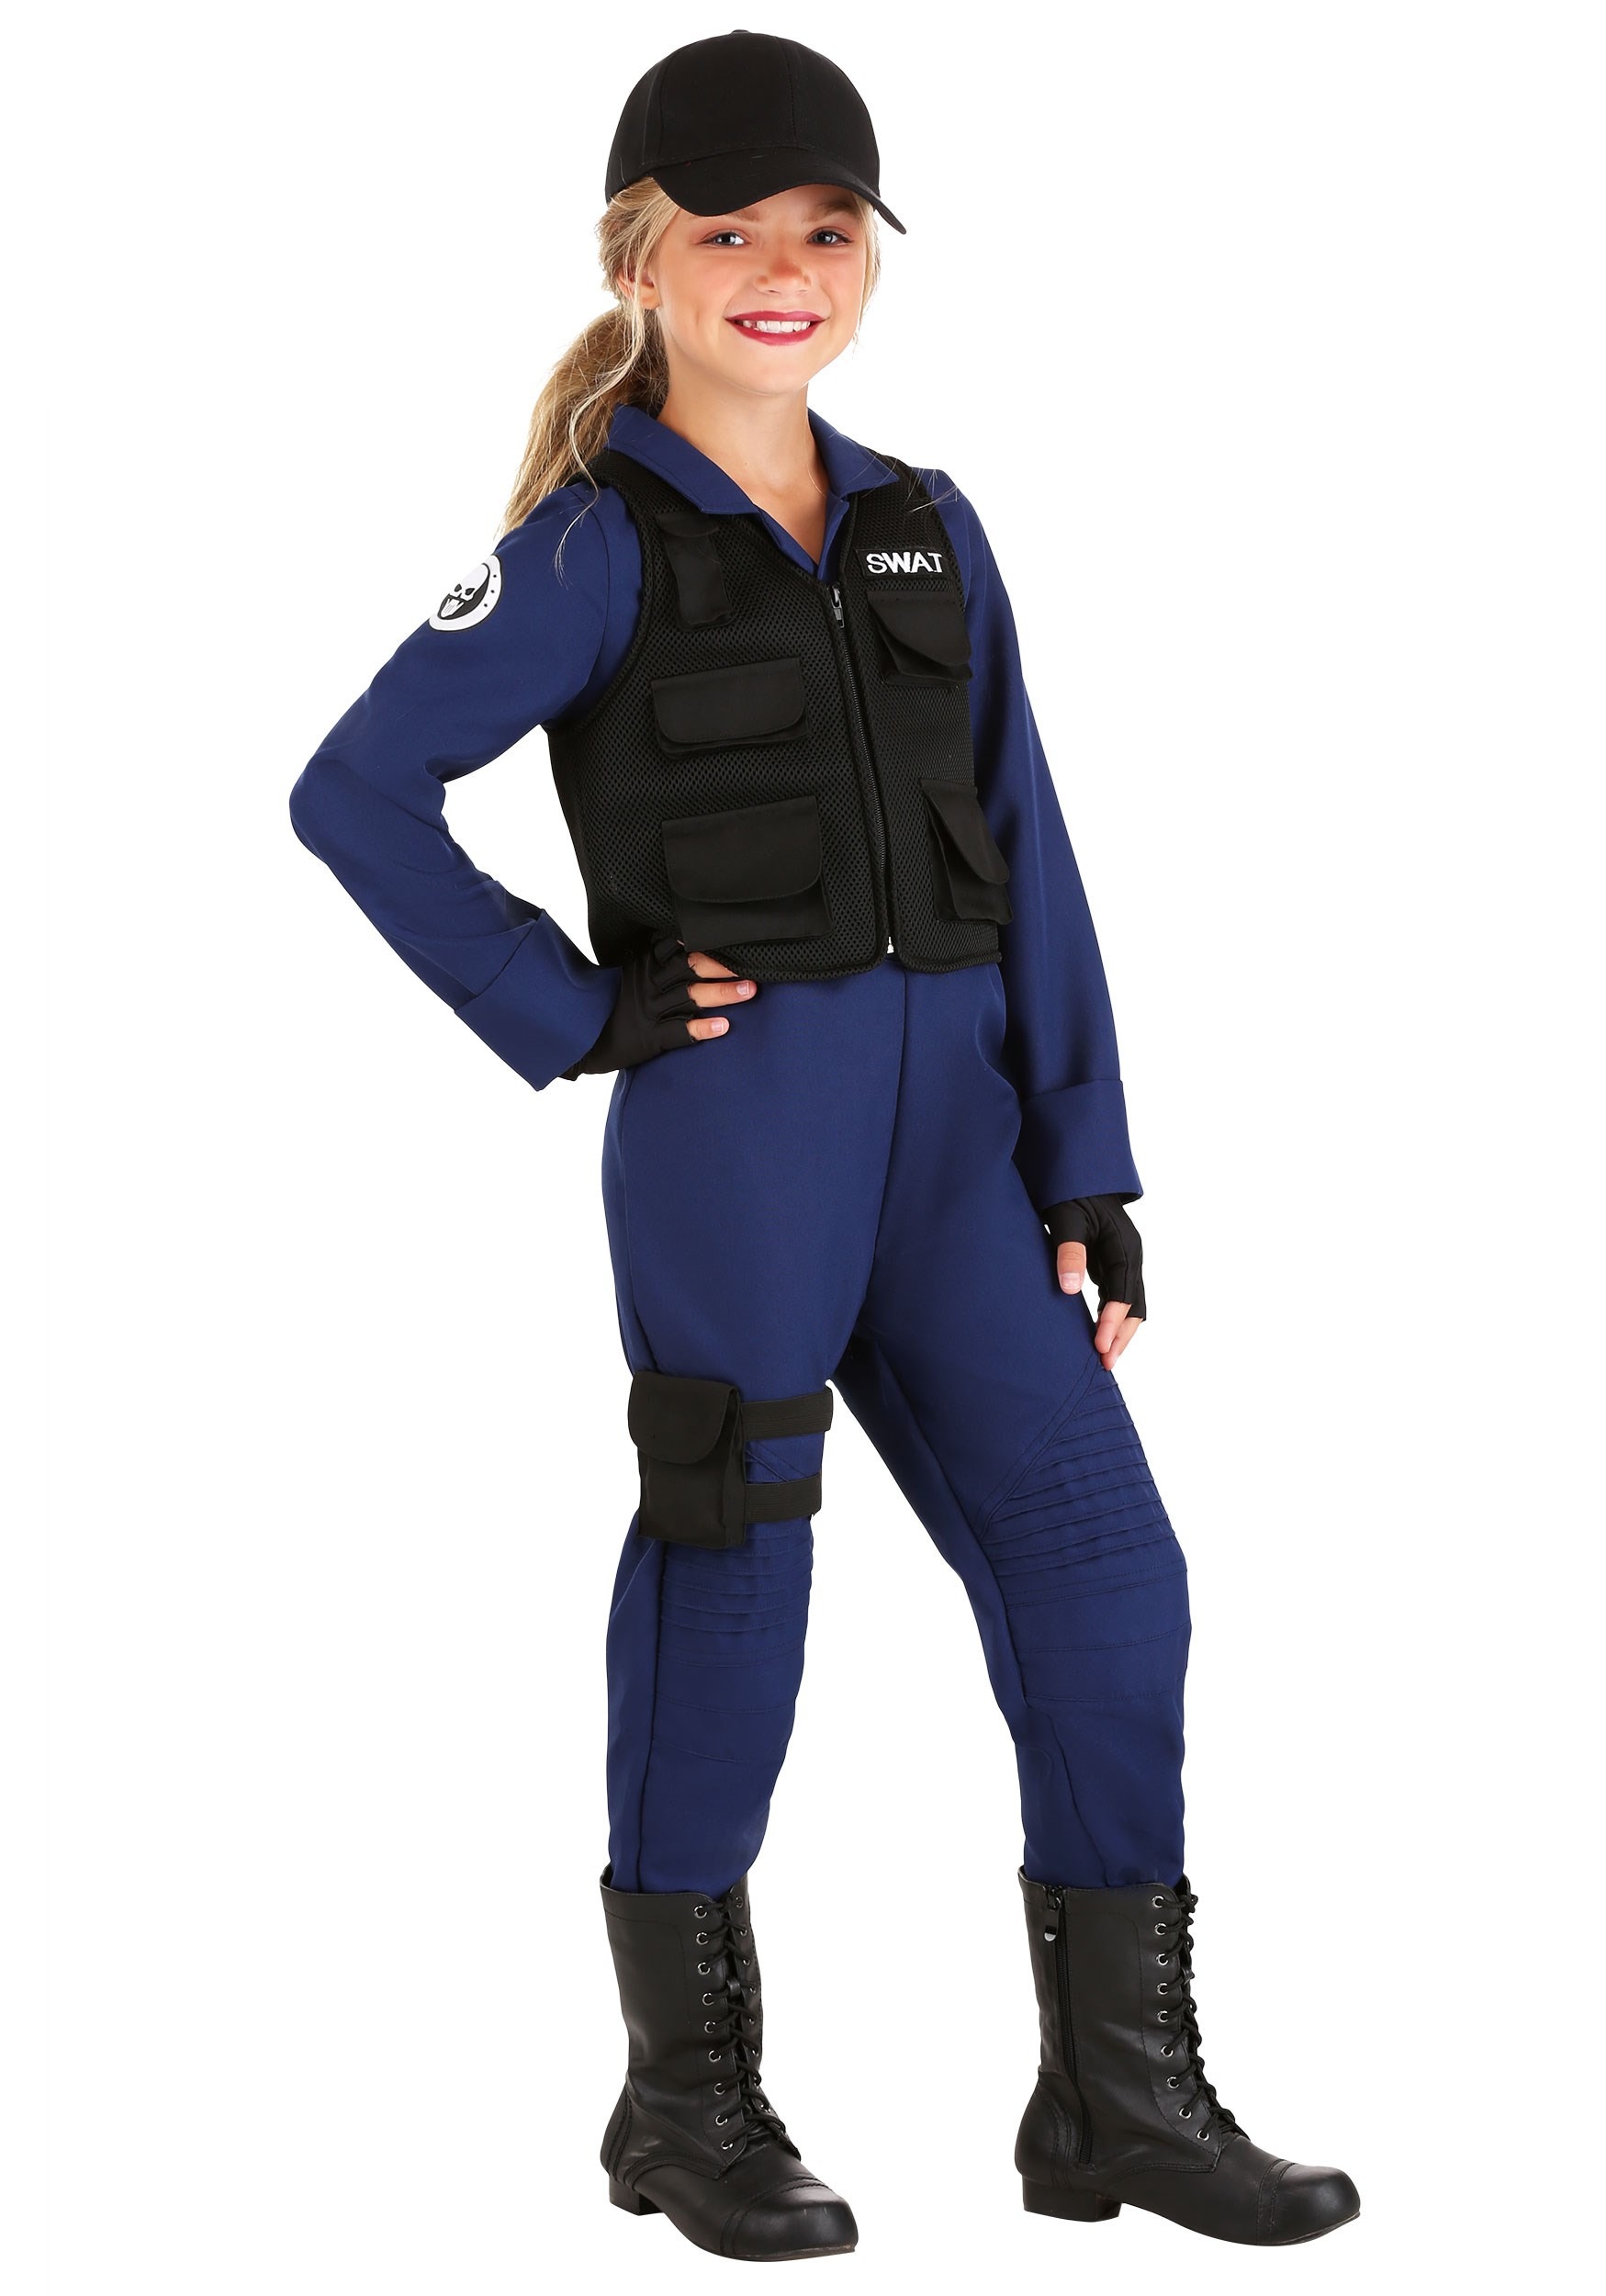 Police SWAT Costume For Girl's